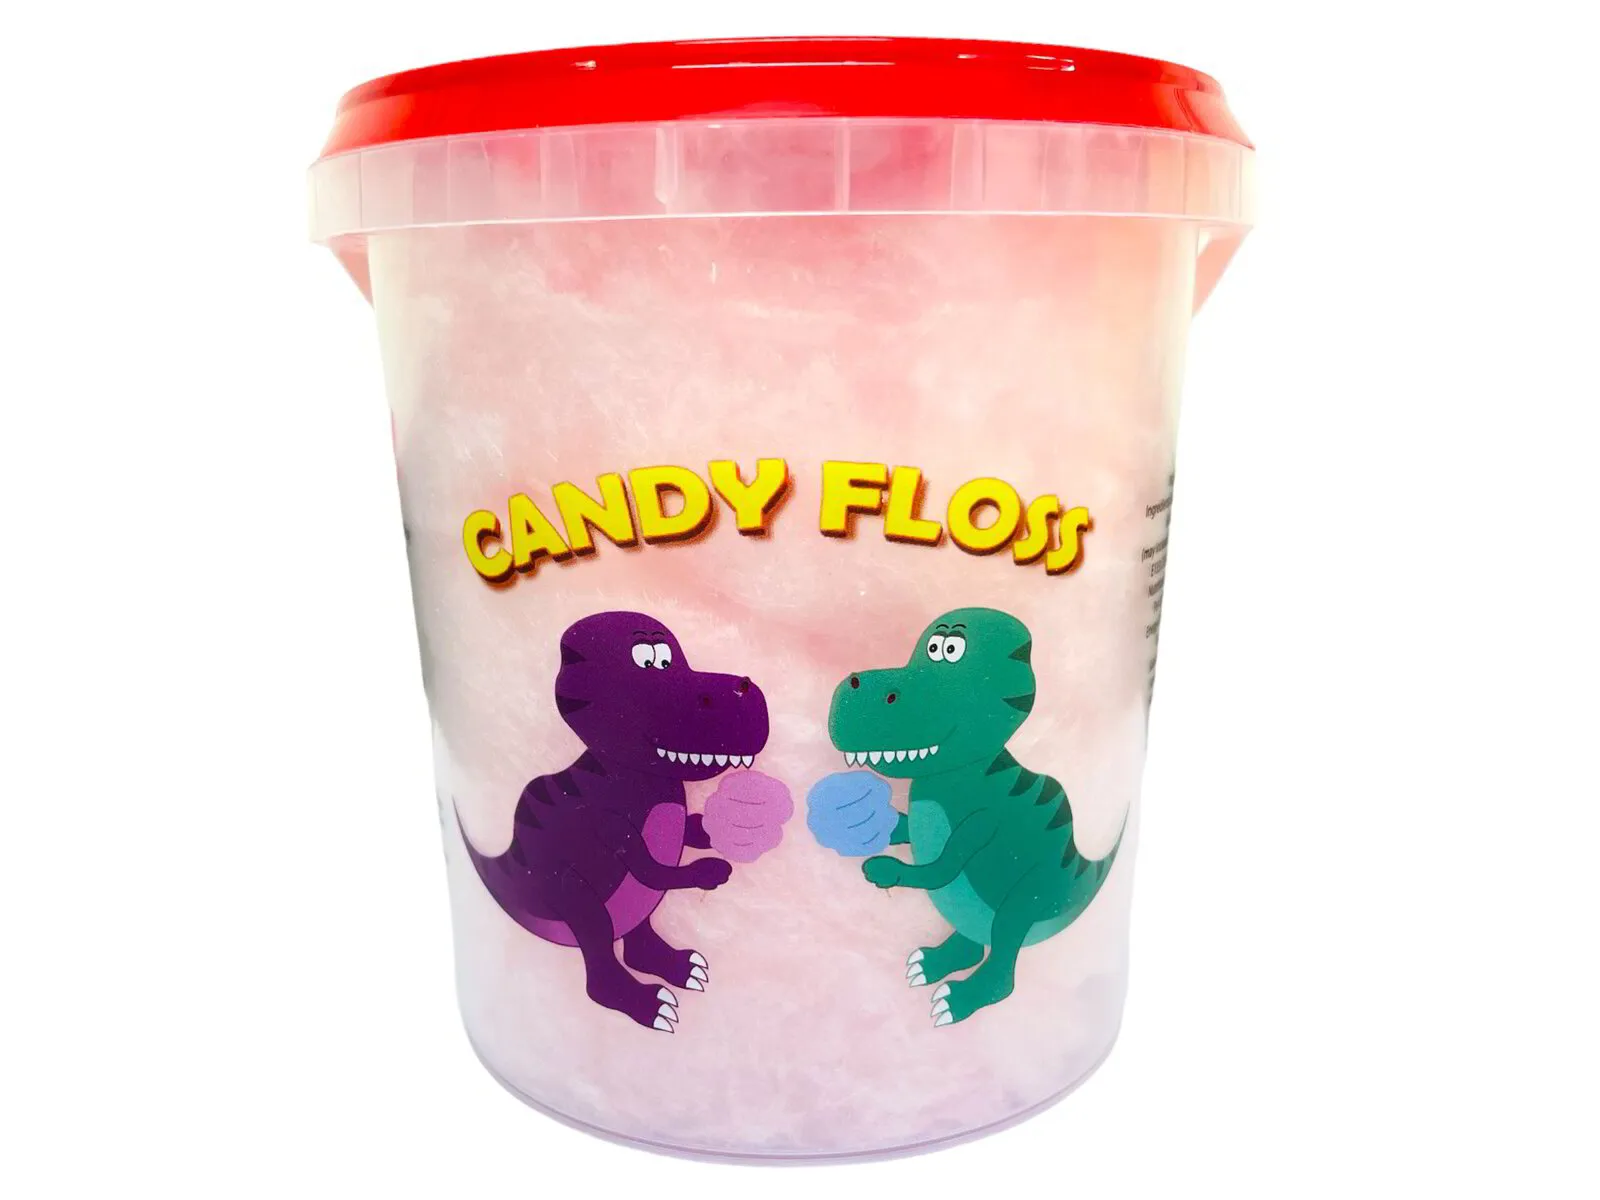 24x 1 litre Candy Floss In Dinosaur Printed Tubs